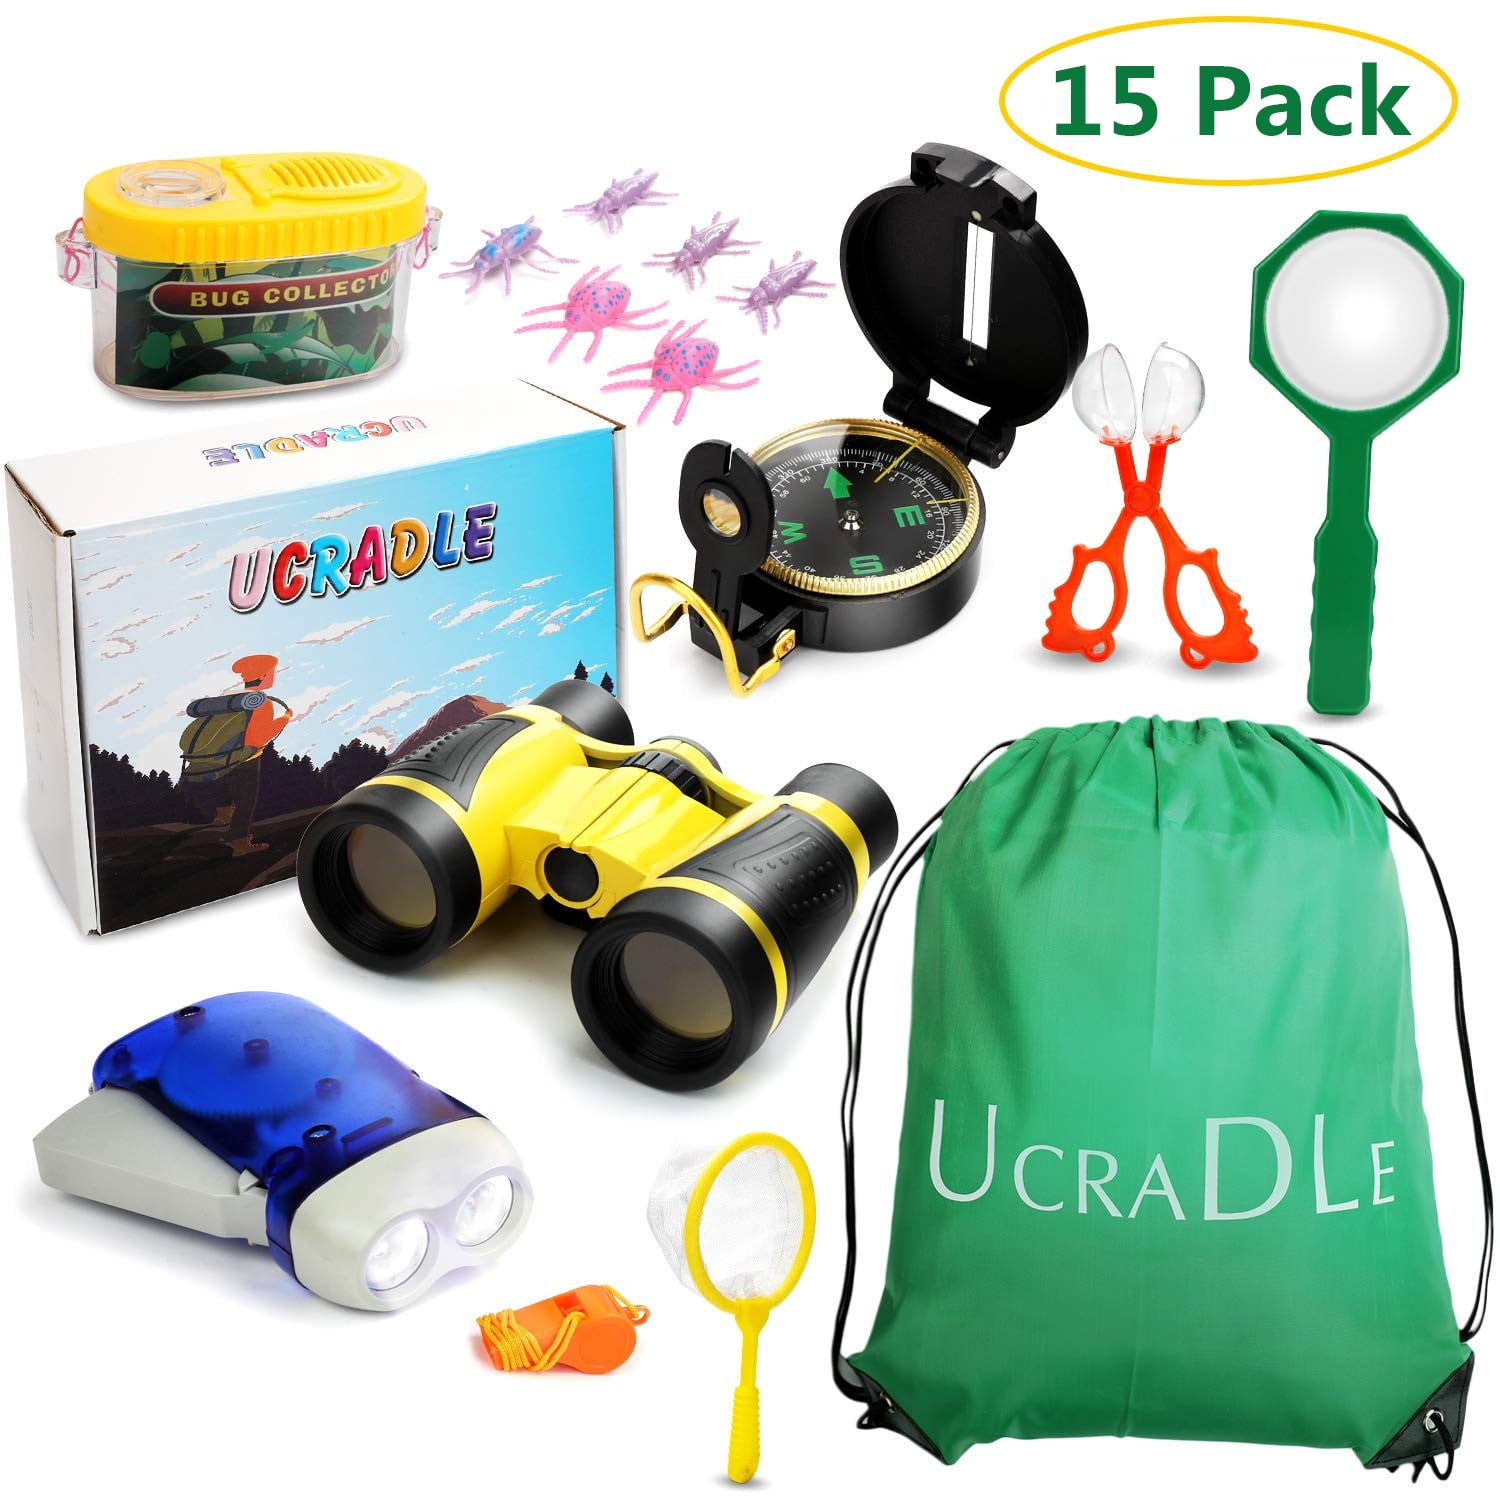 CWGMG Outdoor Explorer Kit and 8PCS Bug Catcher Kit for Great Toys Kids Gift for Boys & Girls Age 3-12 Year Old